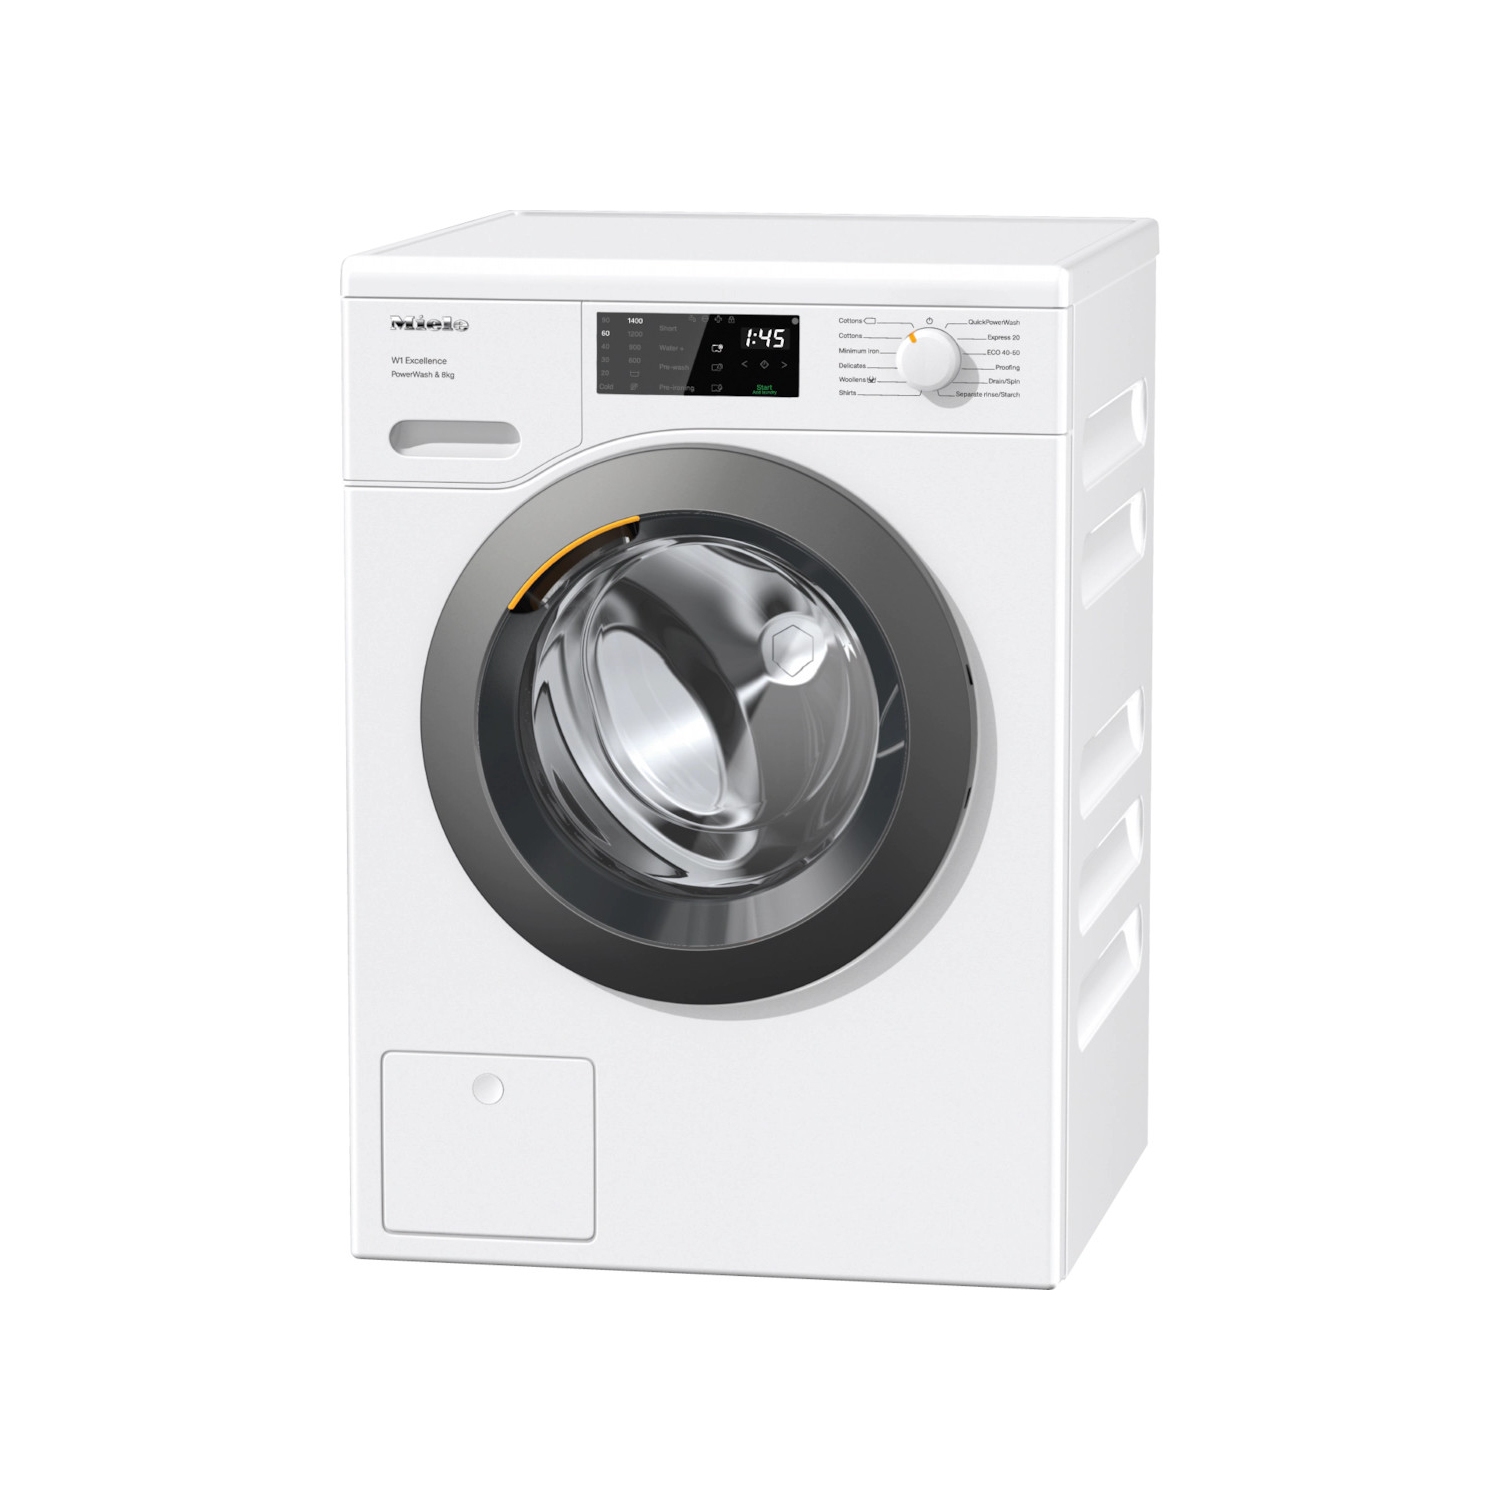 Miele WED325 Freestanding Washing Machine, 8kg Load, 1400rpm Spin - 0